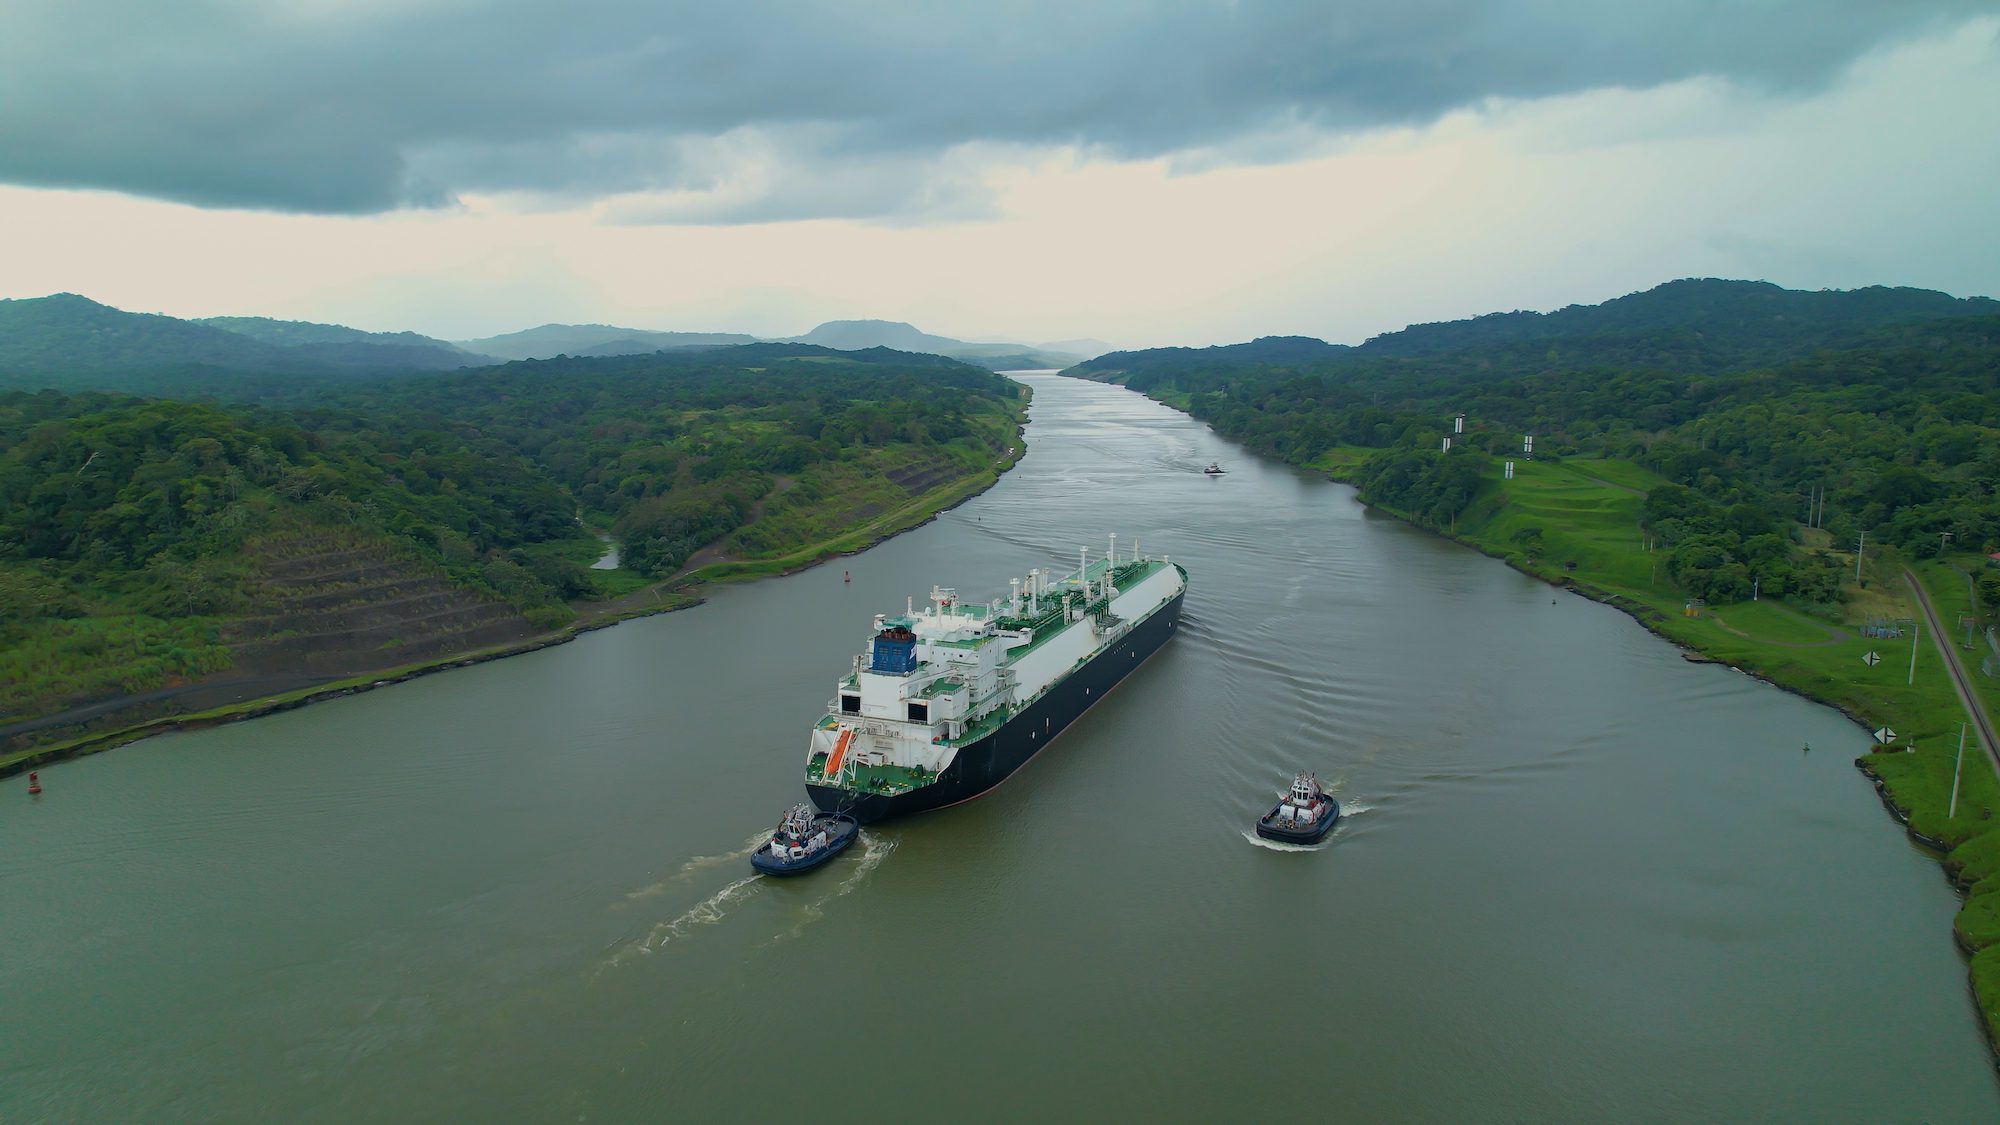 An LNG carrier transits through the Panama Canal. Photo credit: Flystock/Shutterstock